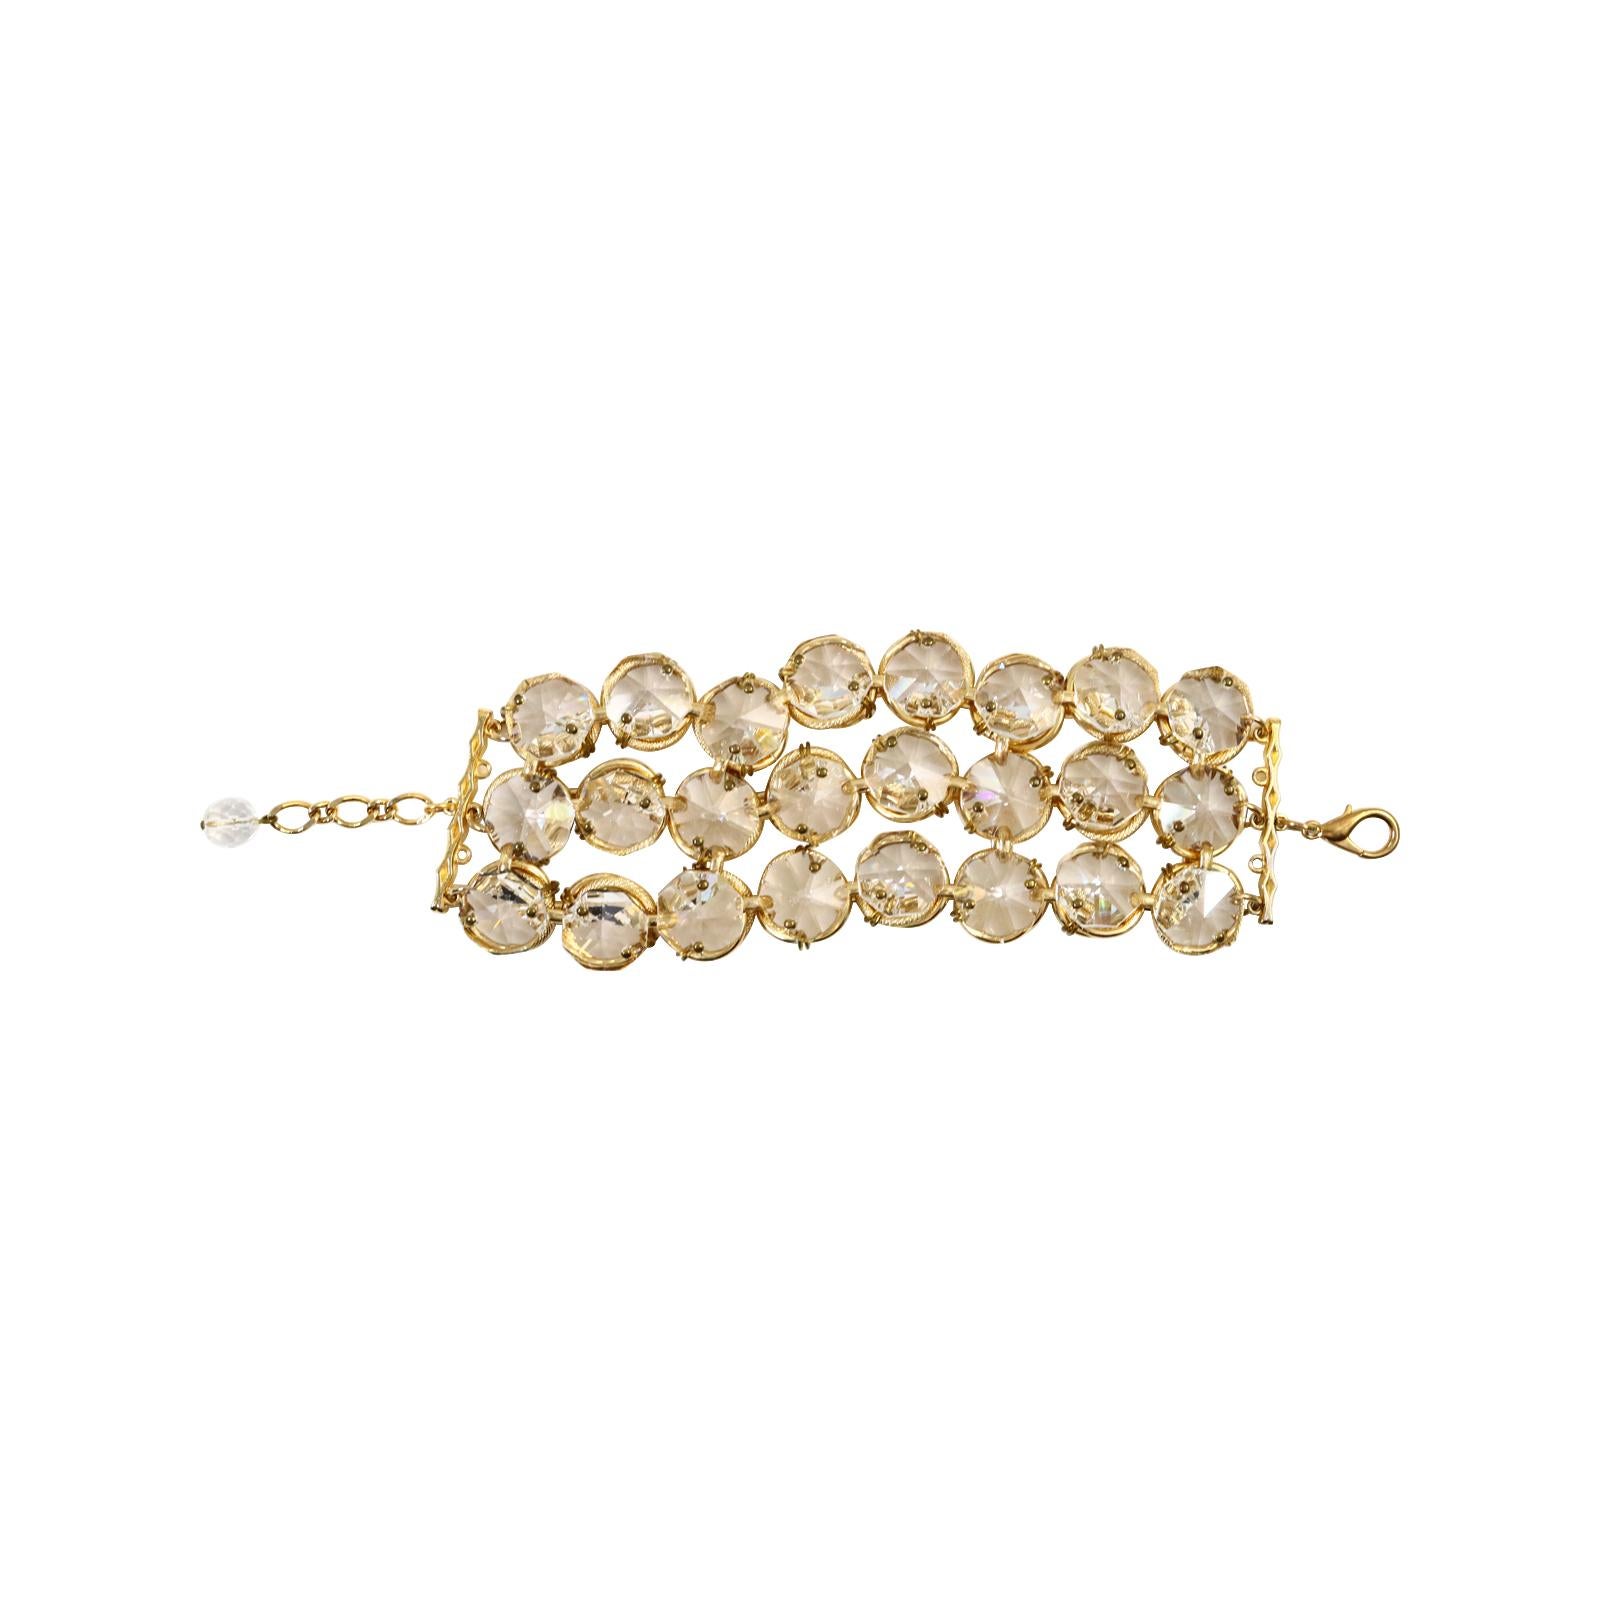 Vintage Poggi Paris Gold Tone with Large Crystals Wide Bracelet, circa 1990s In Good Condition For Sale In New York, NY